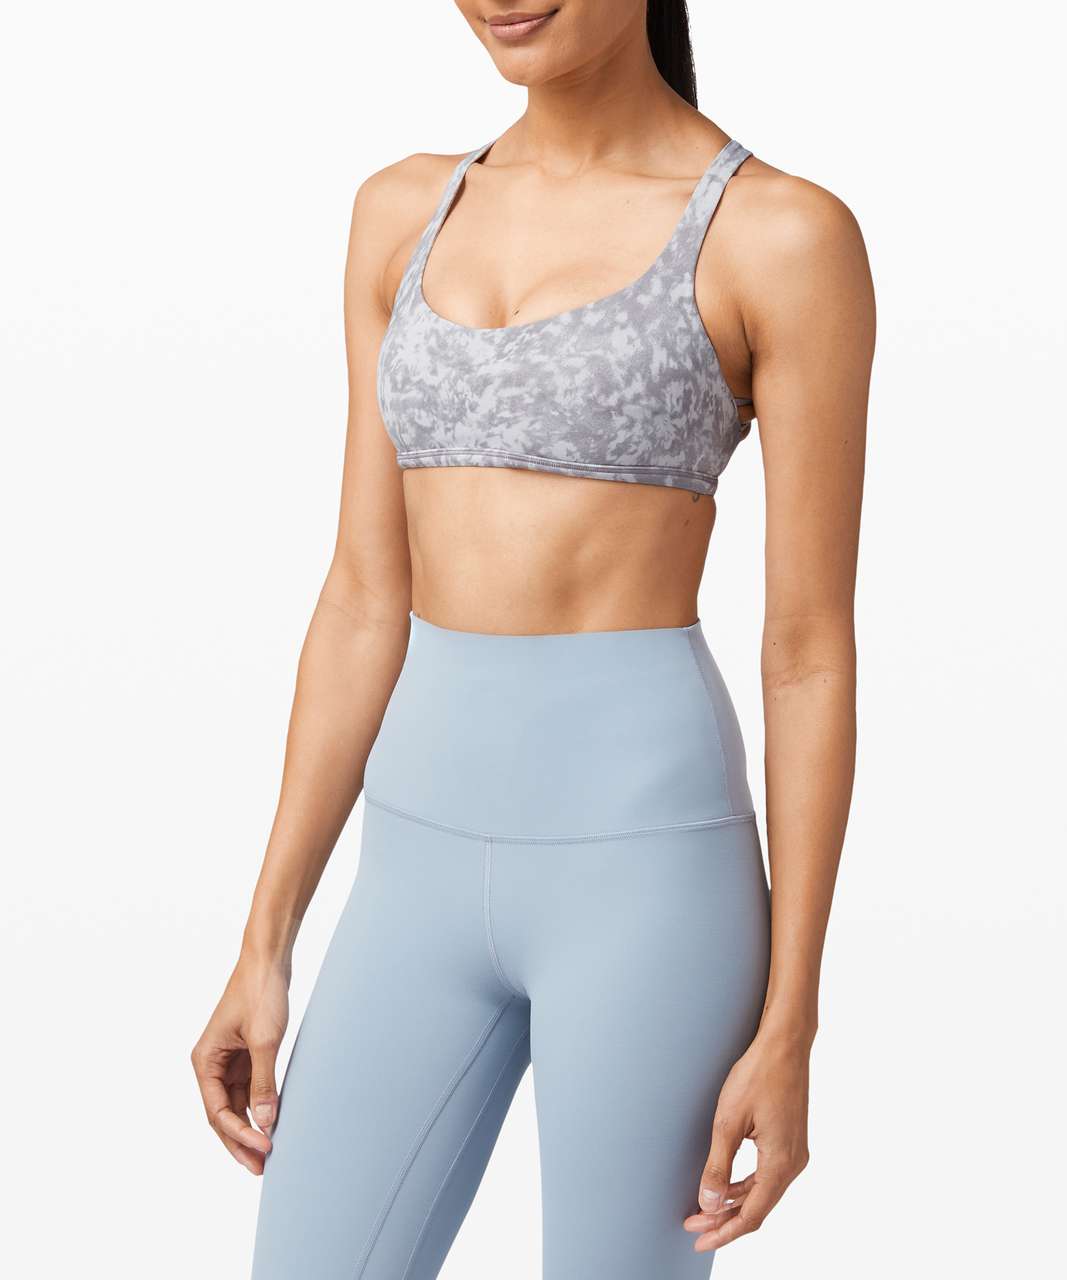 Lululemon Free To Be Bra Wild *Light Support, A/B Cup - Summer Shade Ice Grey Multi